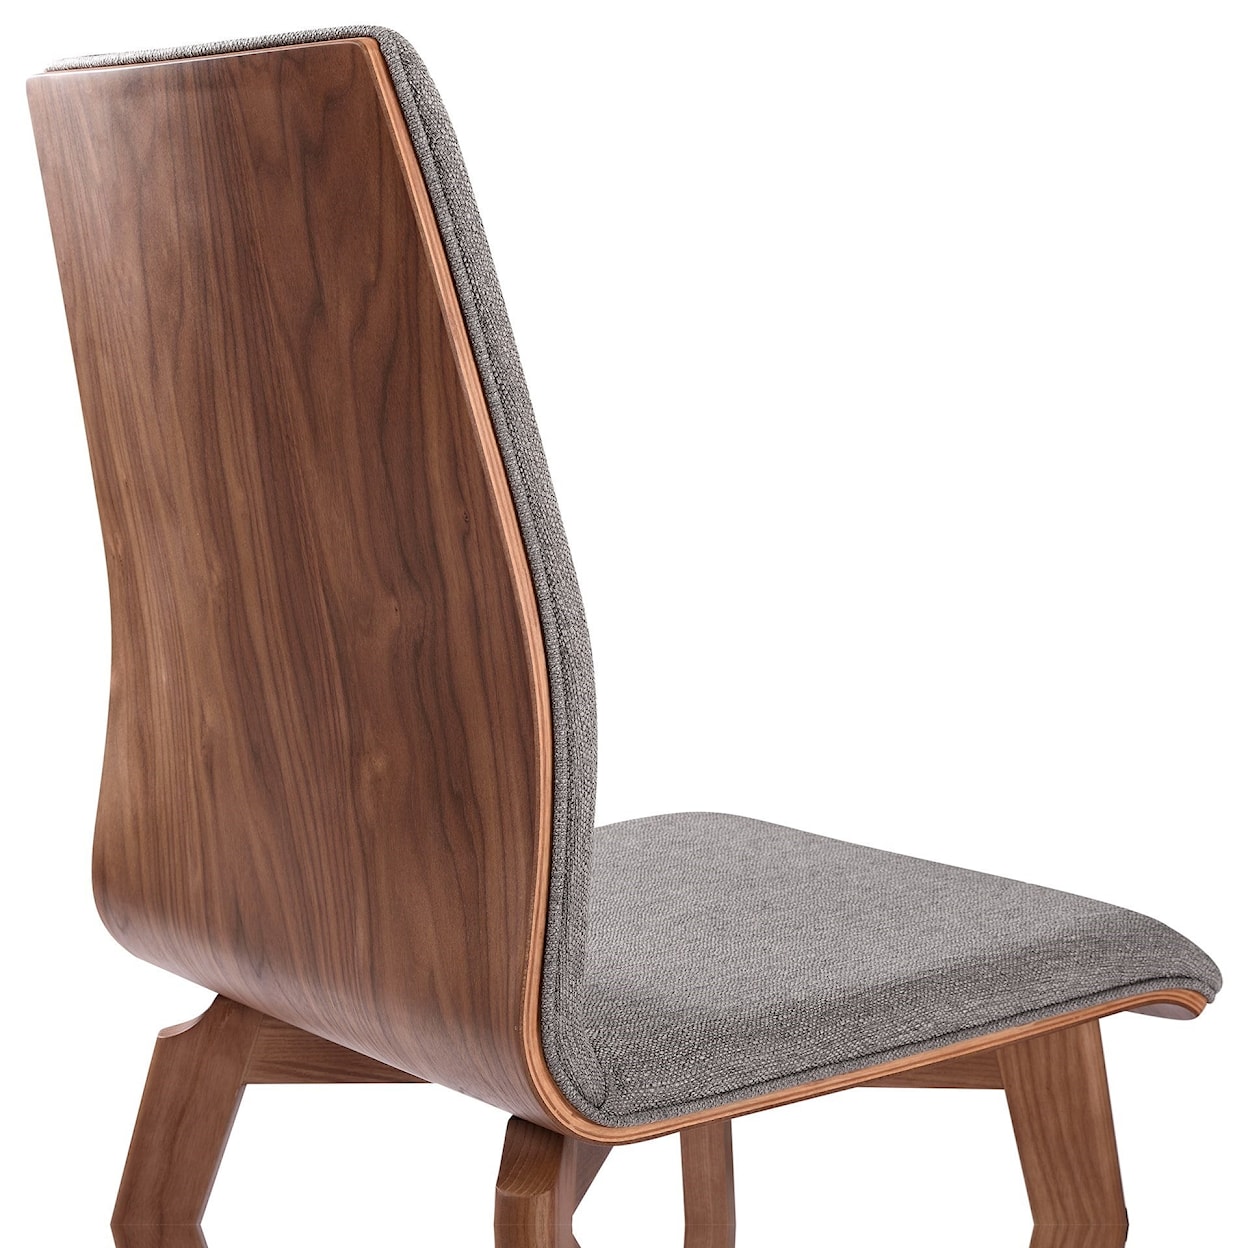 Armen Living Treviso Dining Chairs in Walnut Finish